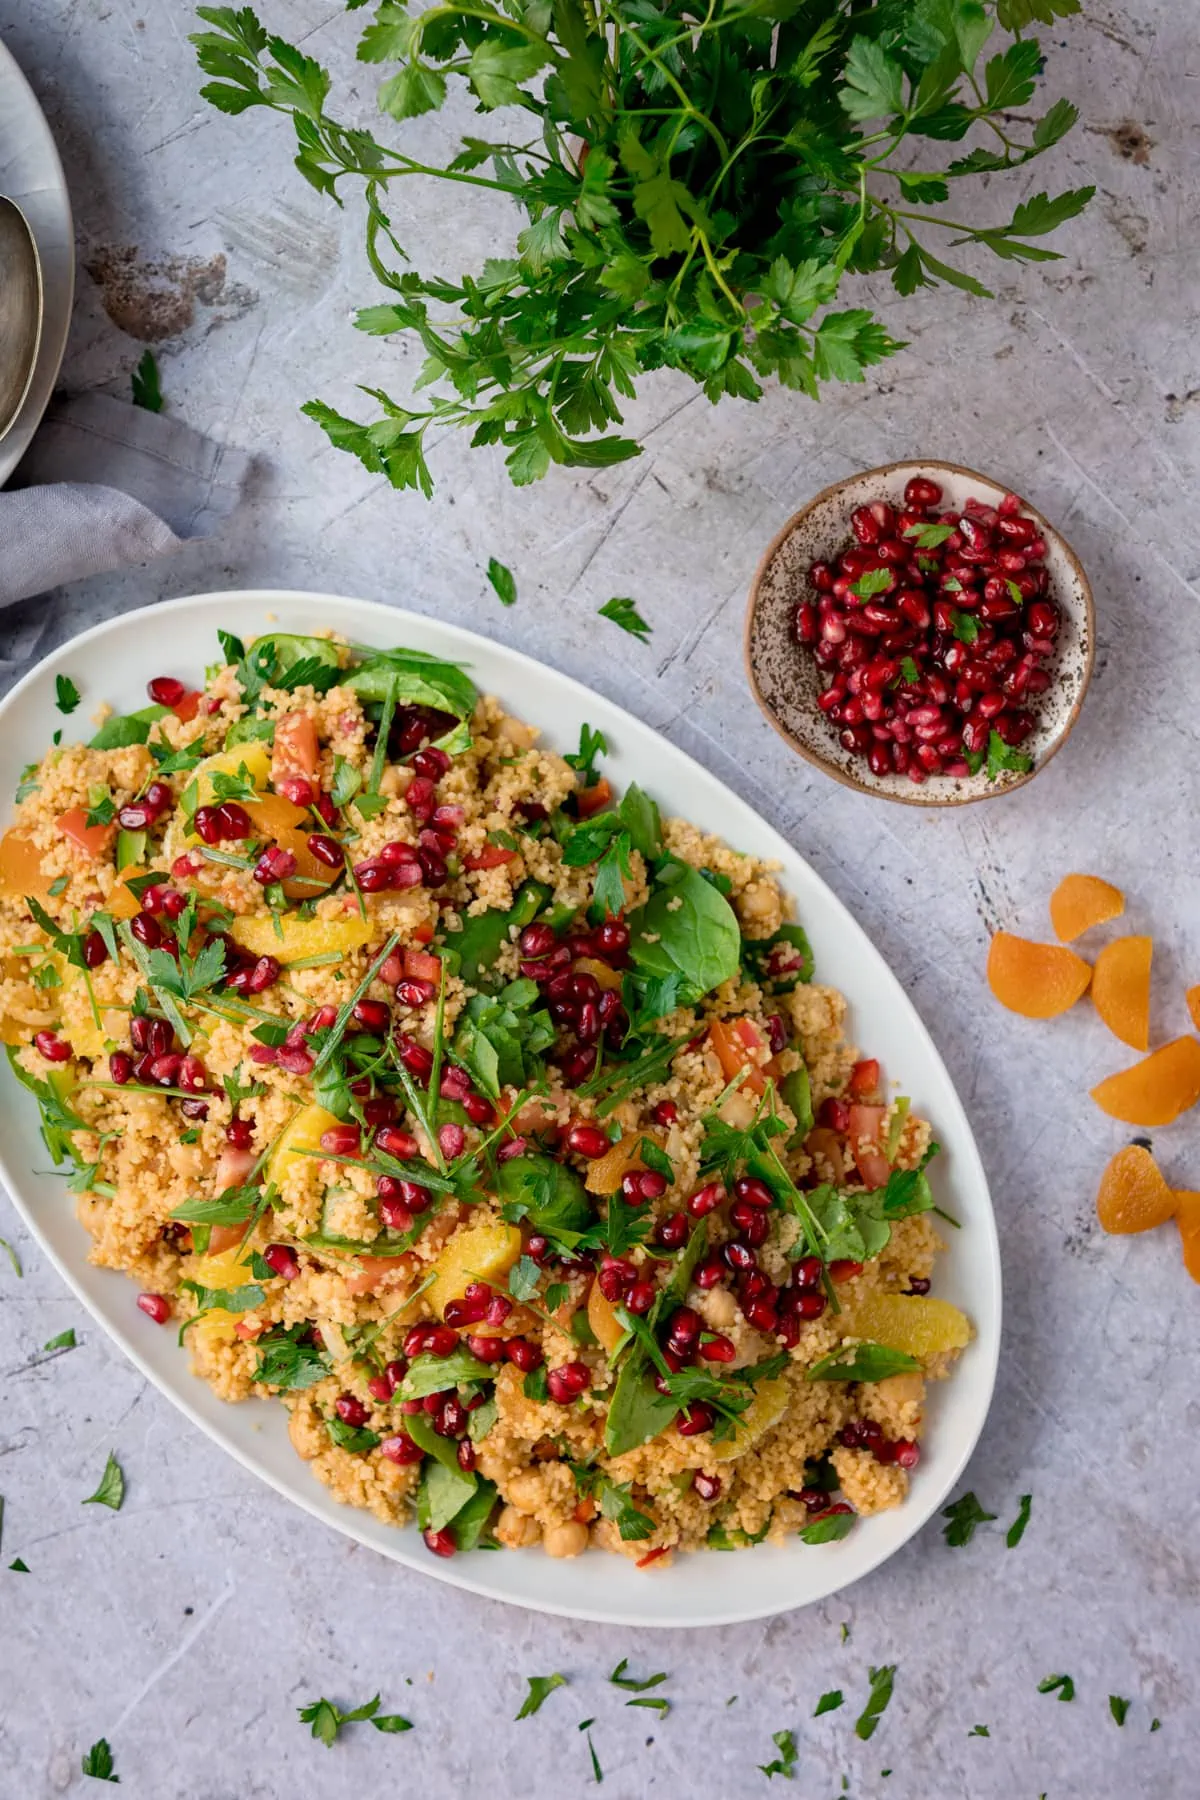 Top image of a large oval white plate filled with Moroccan-style couscous with oranges and pomegranates. The plate is on a white surface next to a plate of pomegranate. There are chopped dried apricots and fresh herbs scattered throughout.